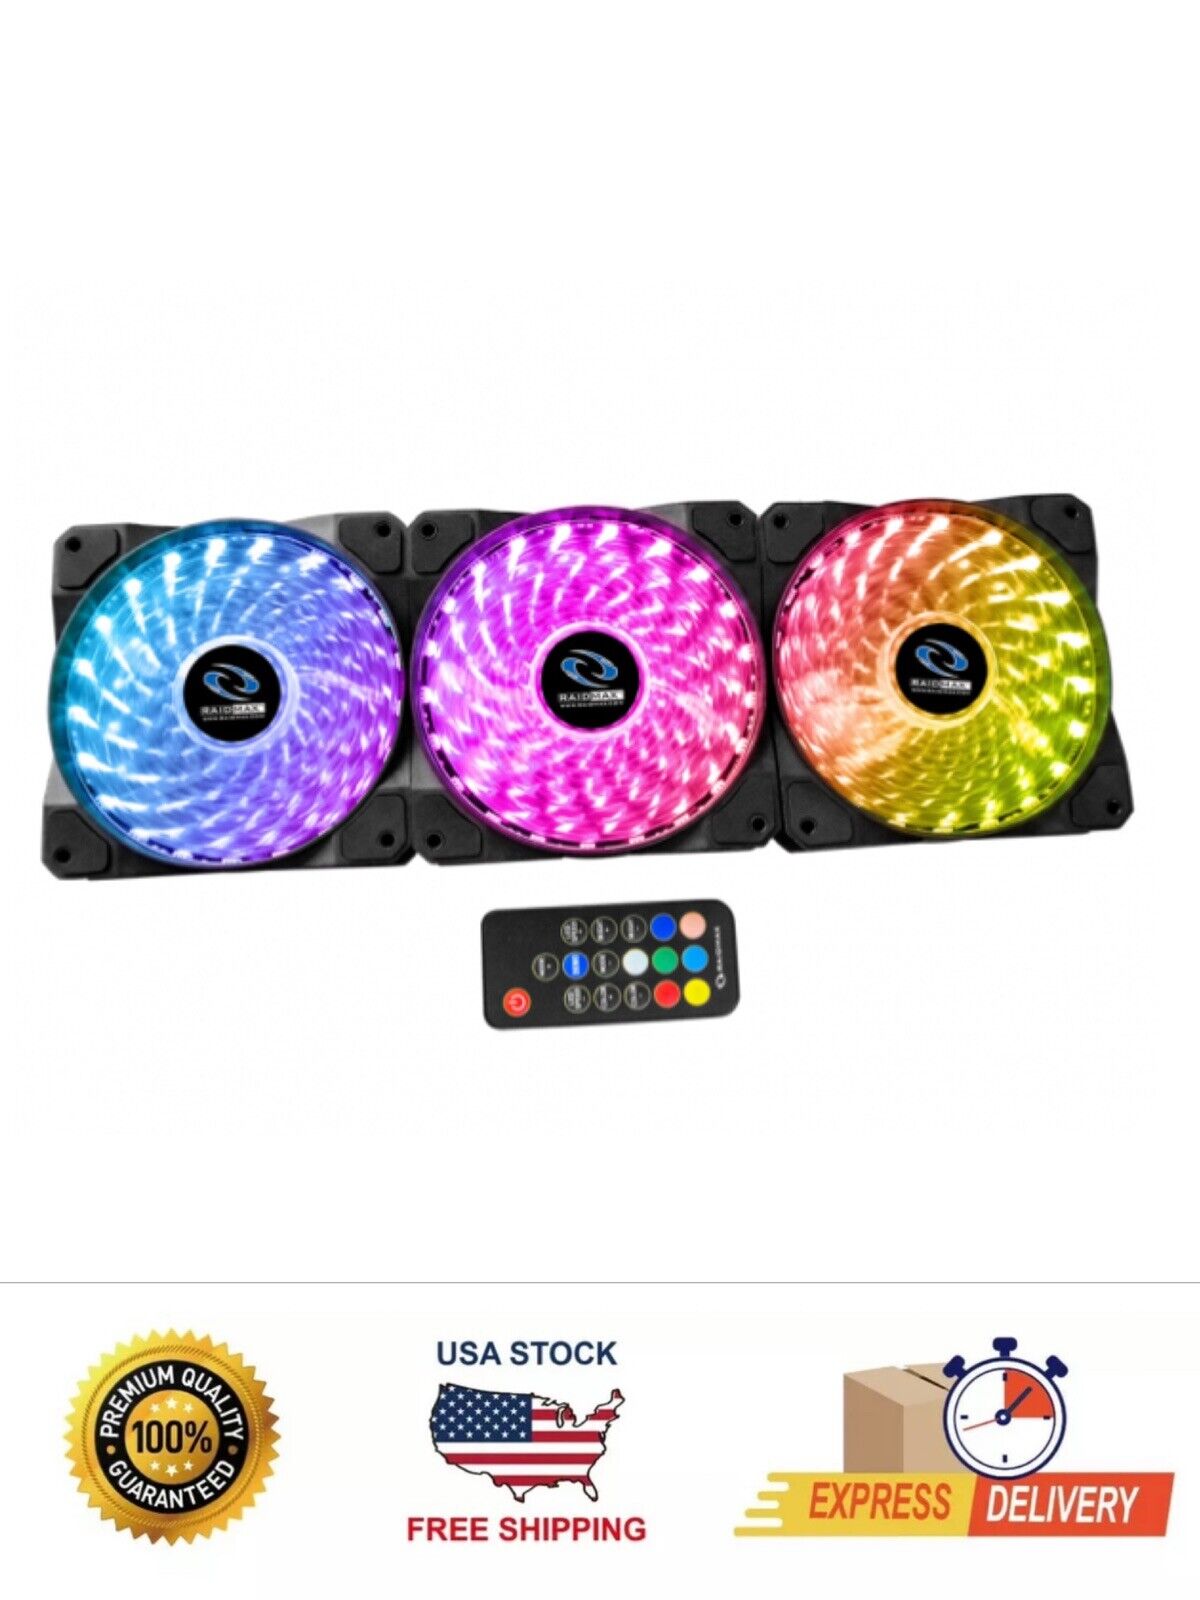 RAIDMAX 3 Pack RGB LED Computer Case PC Cooling Fan 120mm with 1 Remote Control